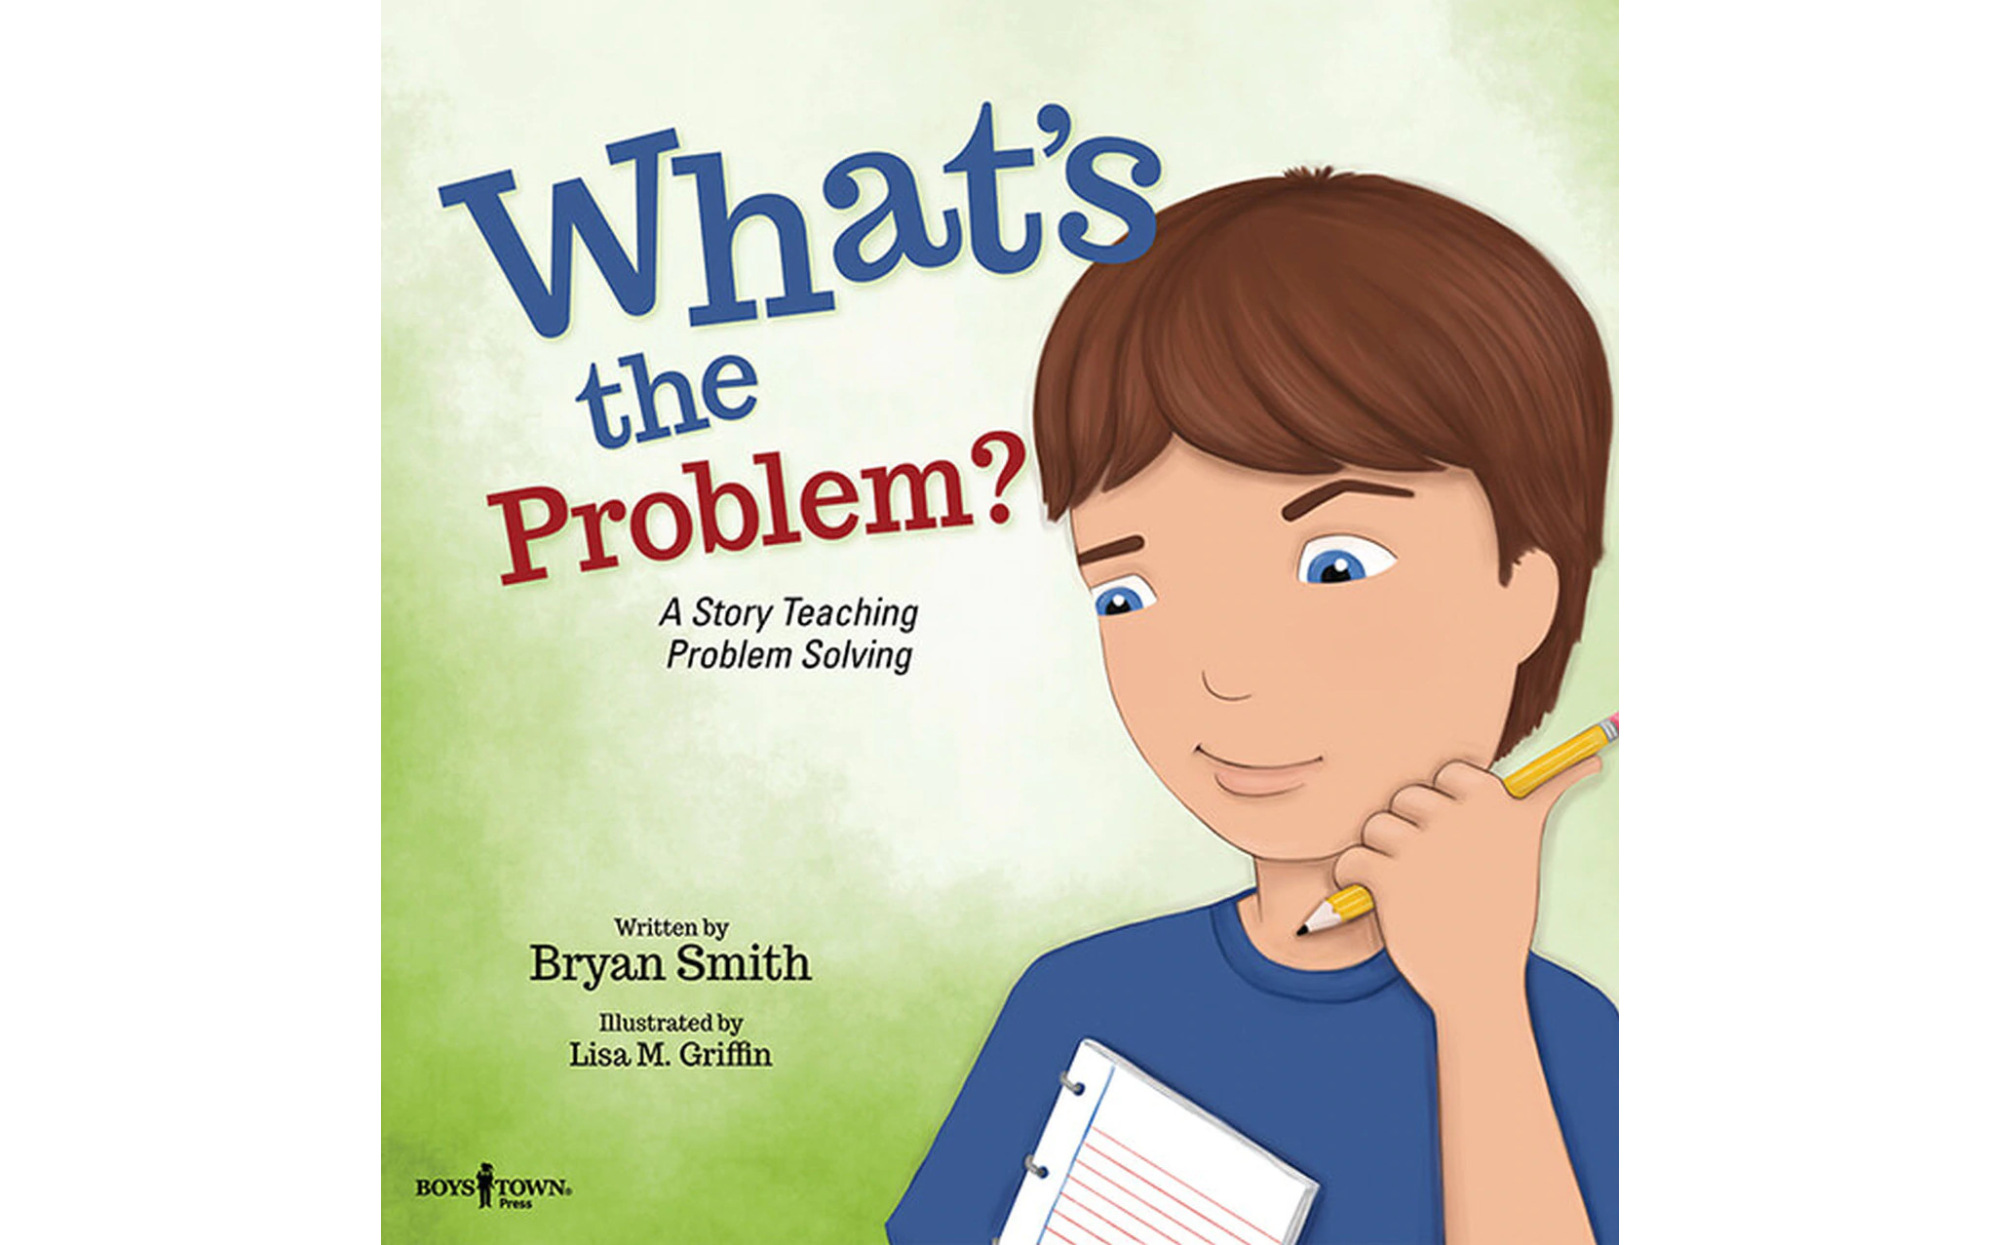 a story about problem solving